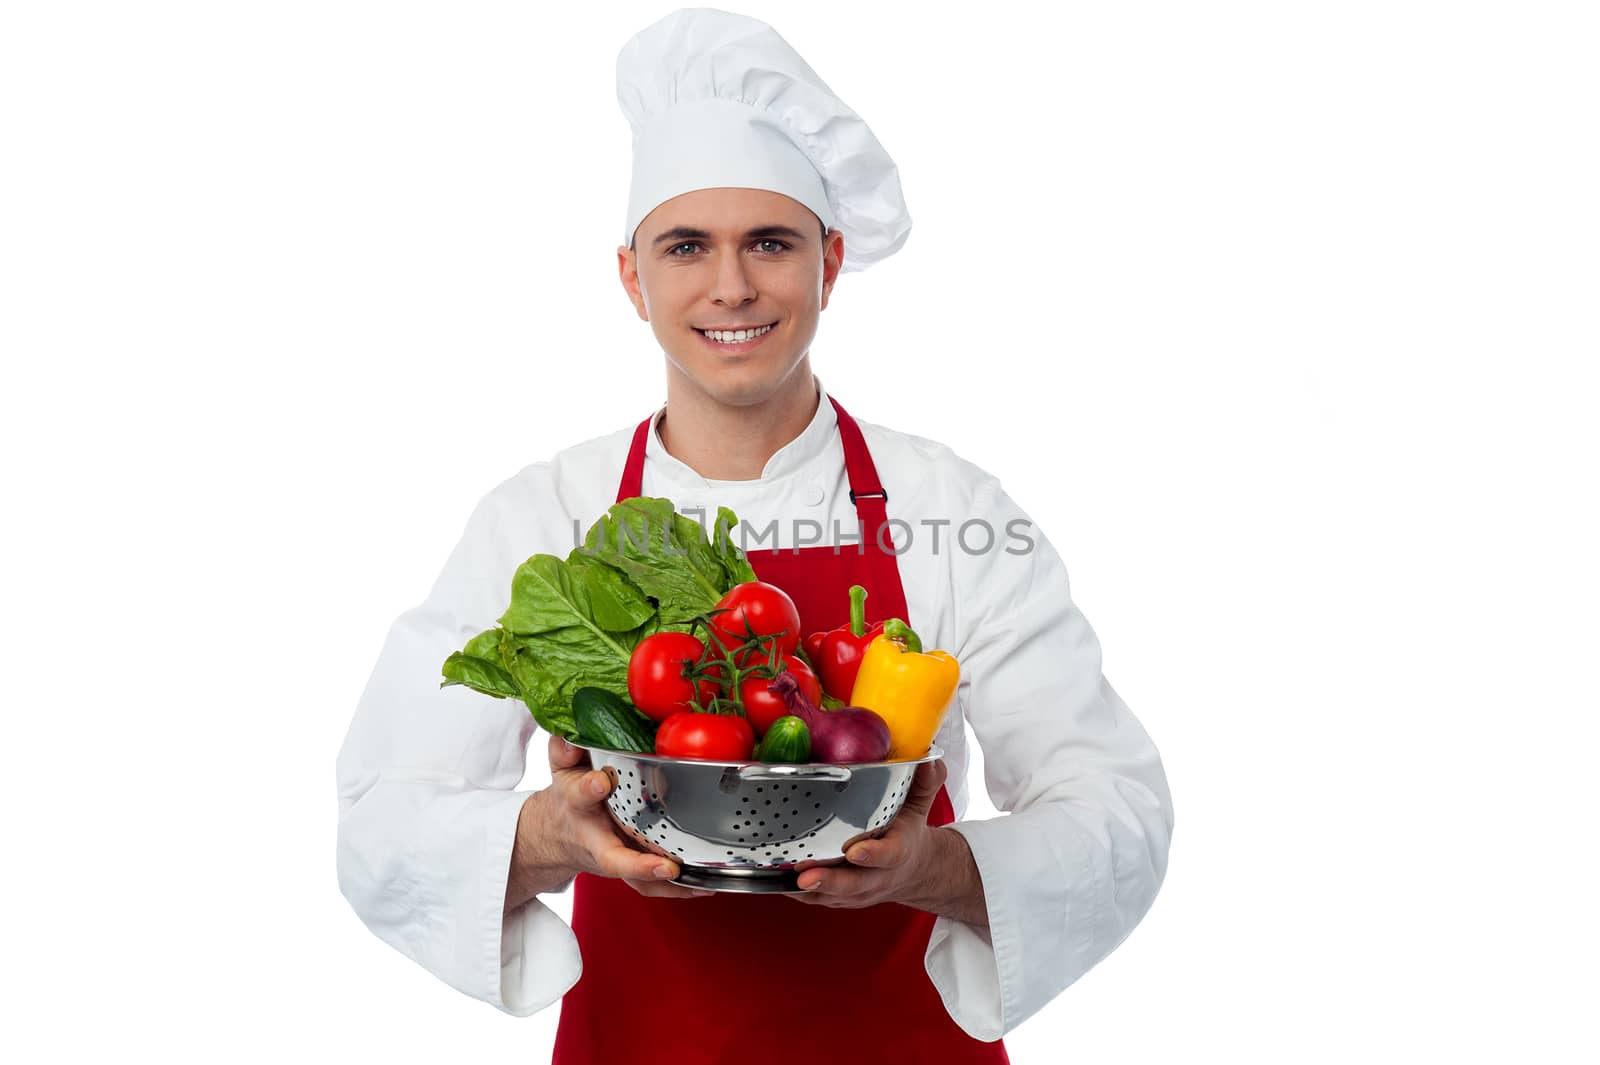 Image of a chef holding vegetables bowl